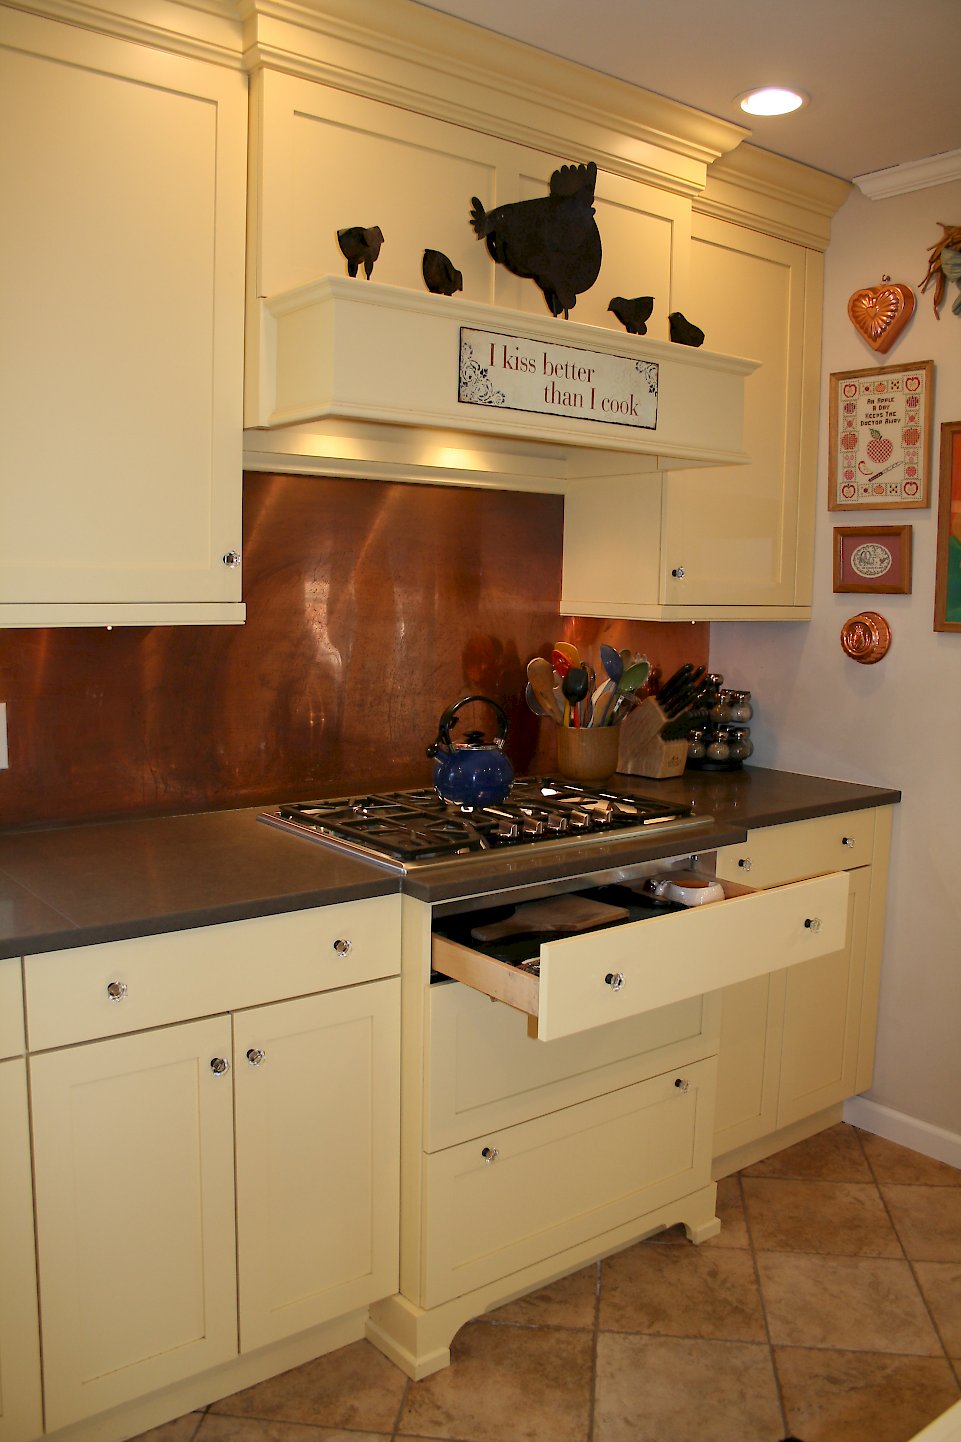 A Thermador 30" gas cooktop with a shallow drawer underneath.